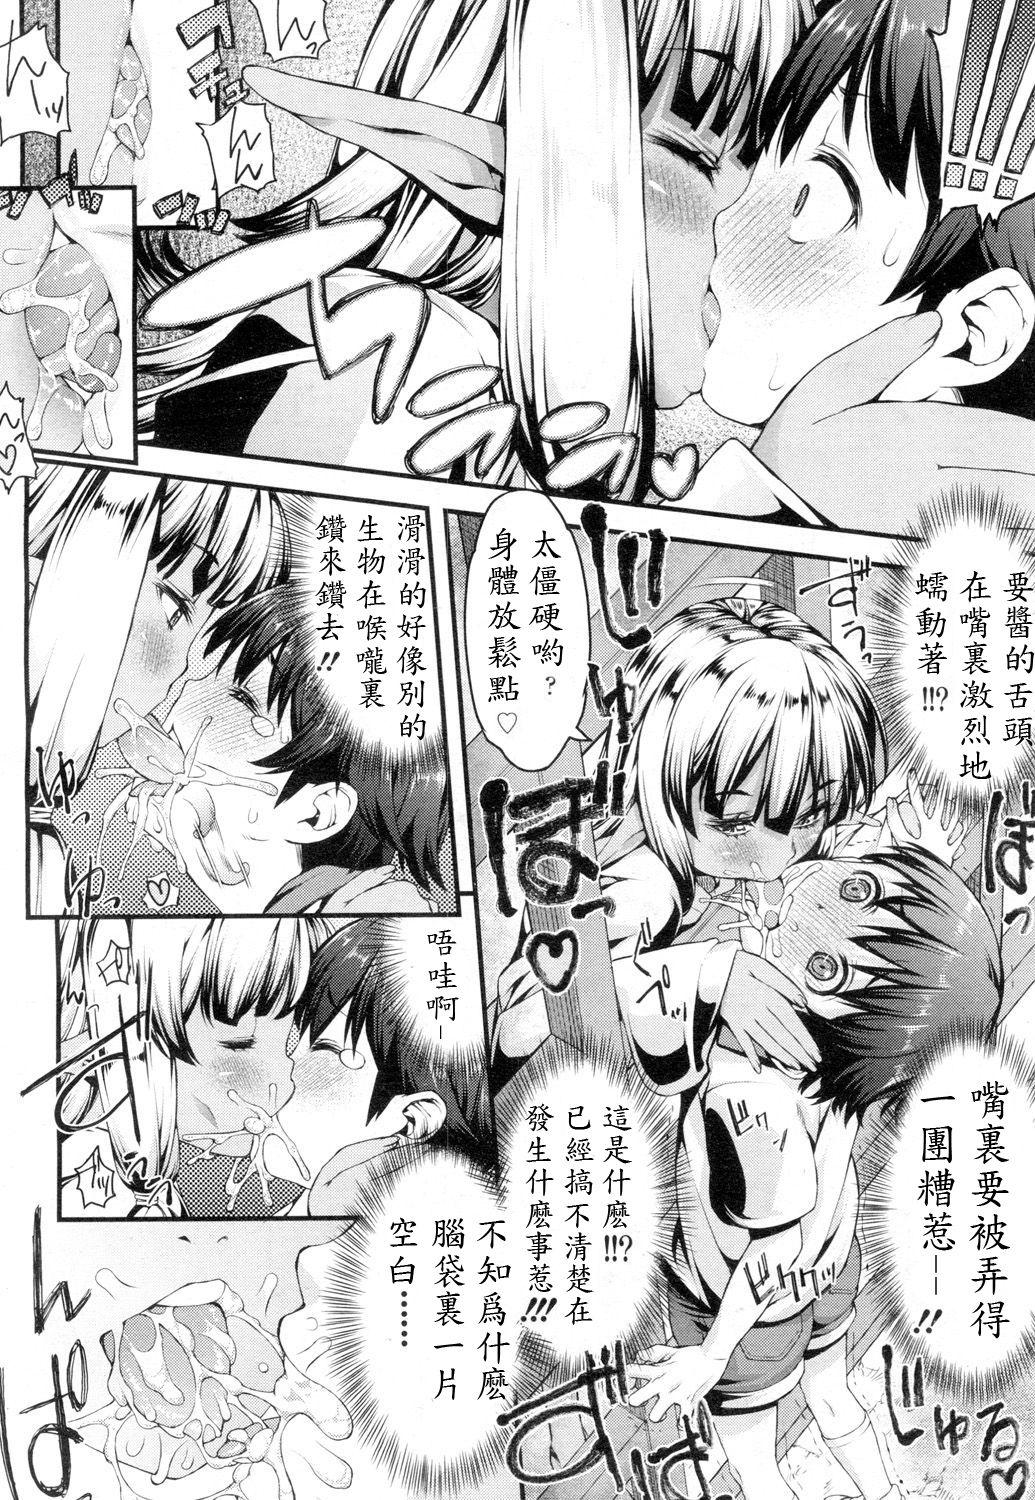 Milfs Licking ♡ Monster Face - Page 6